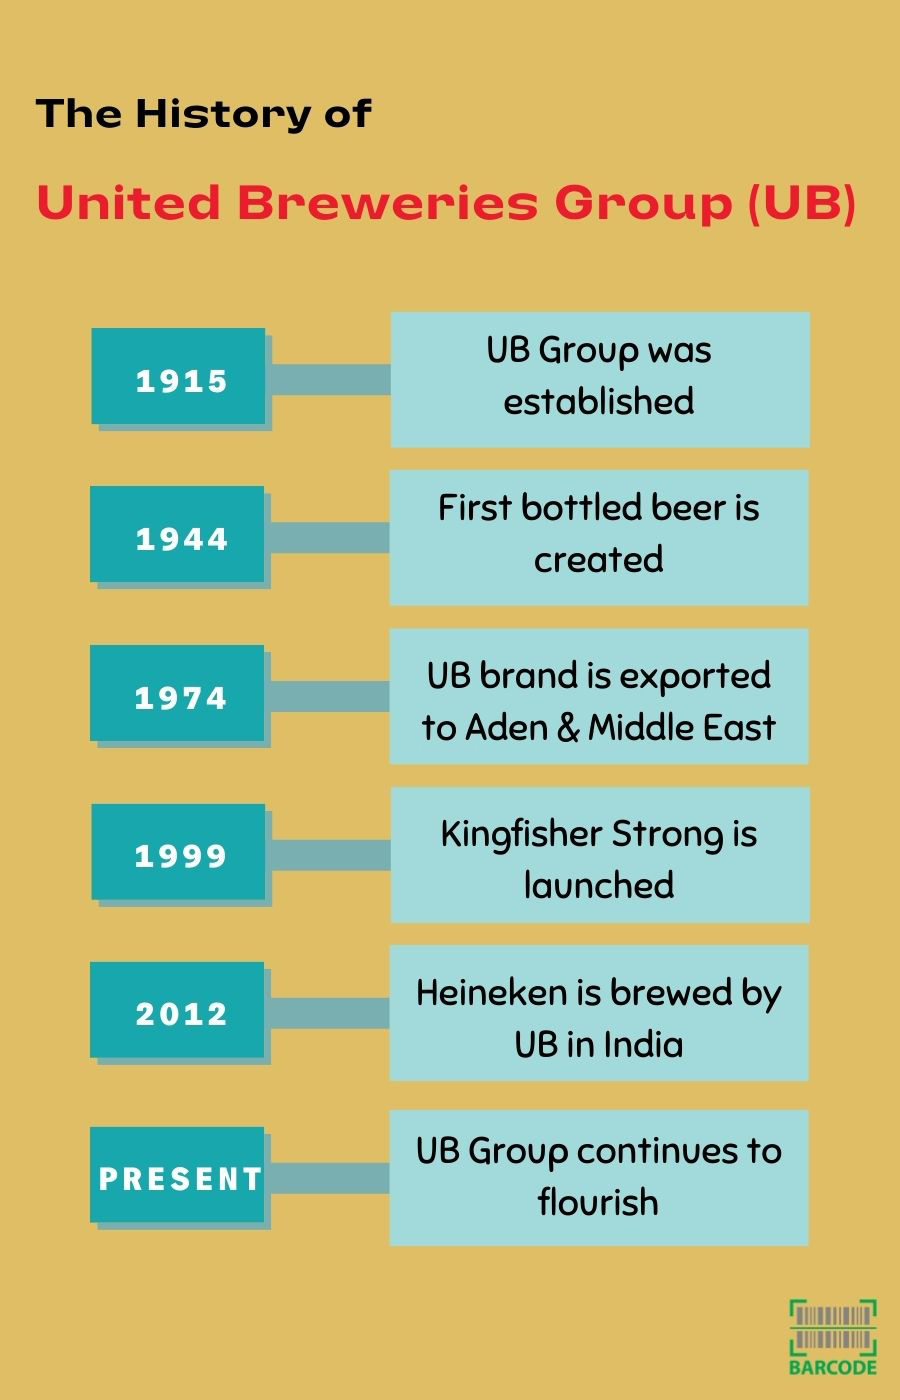 India is United Breweries